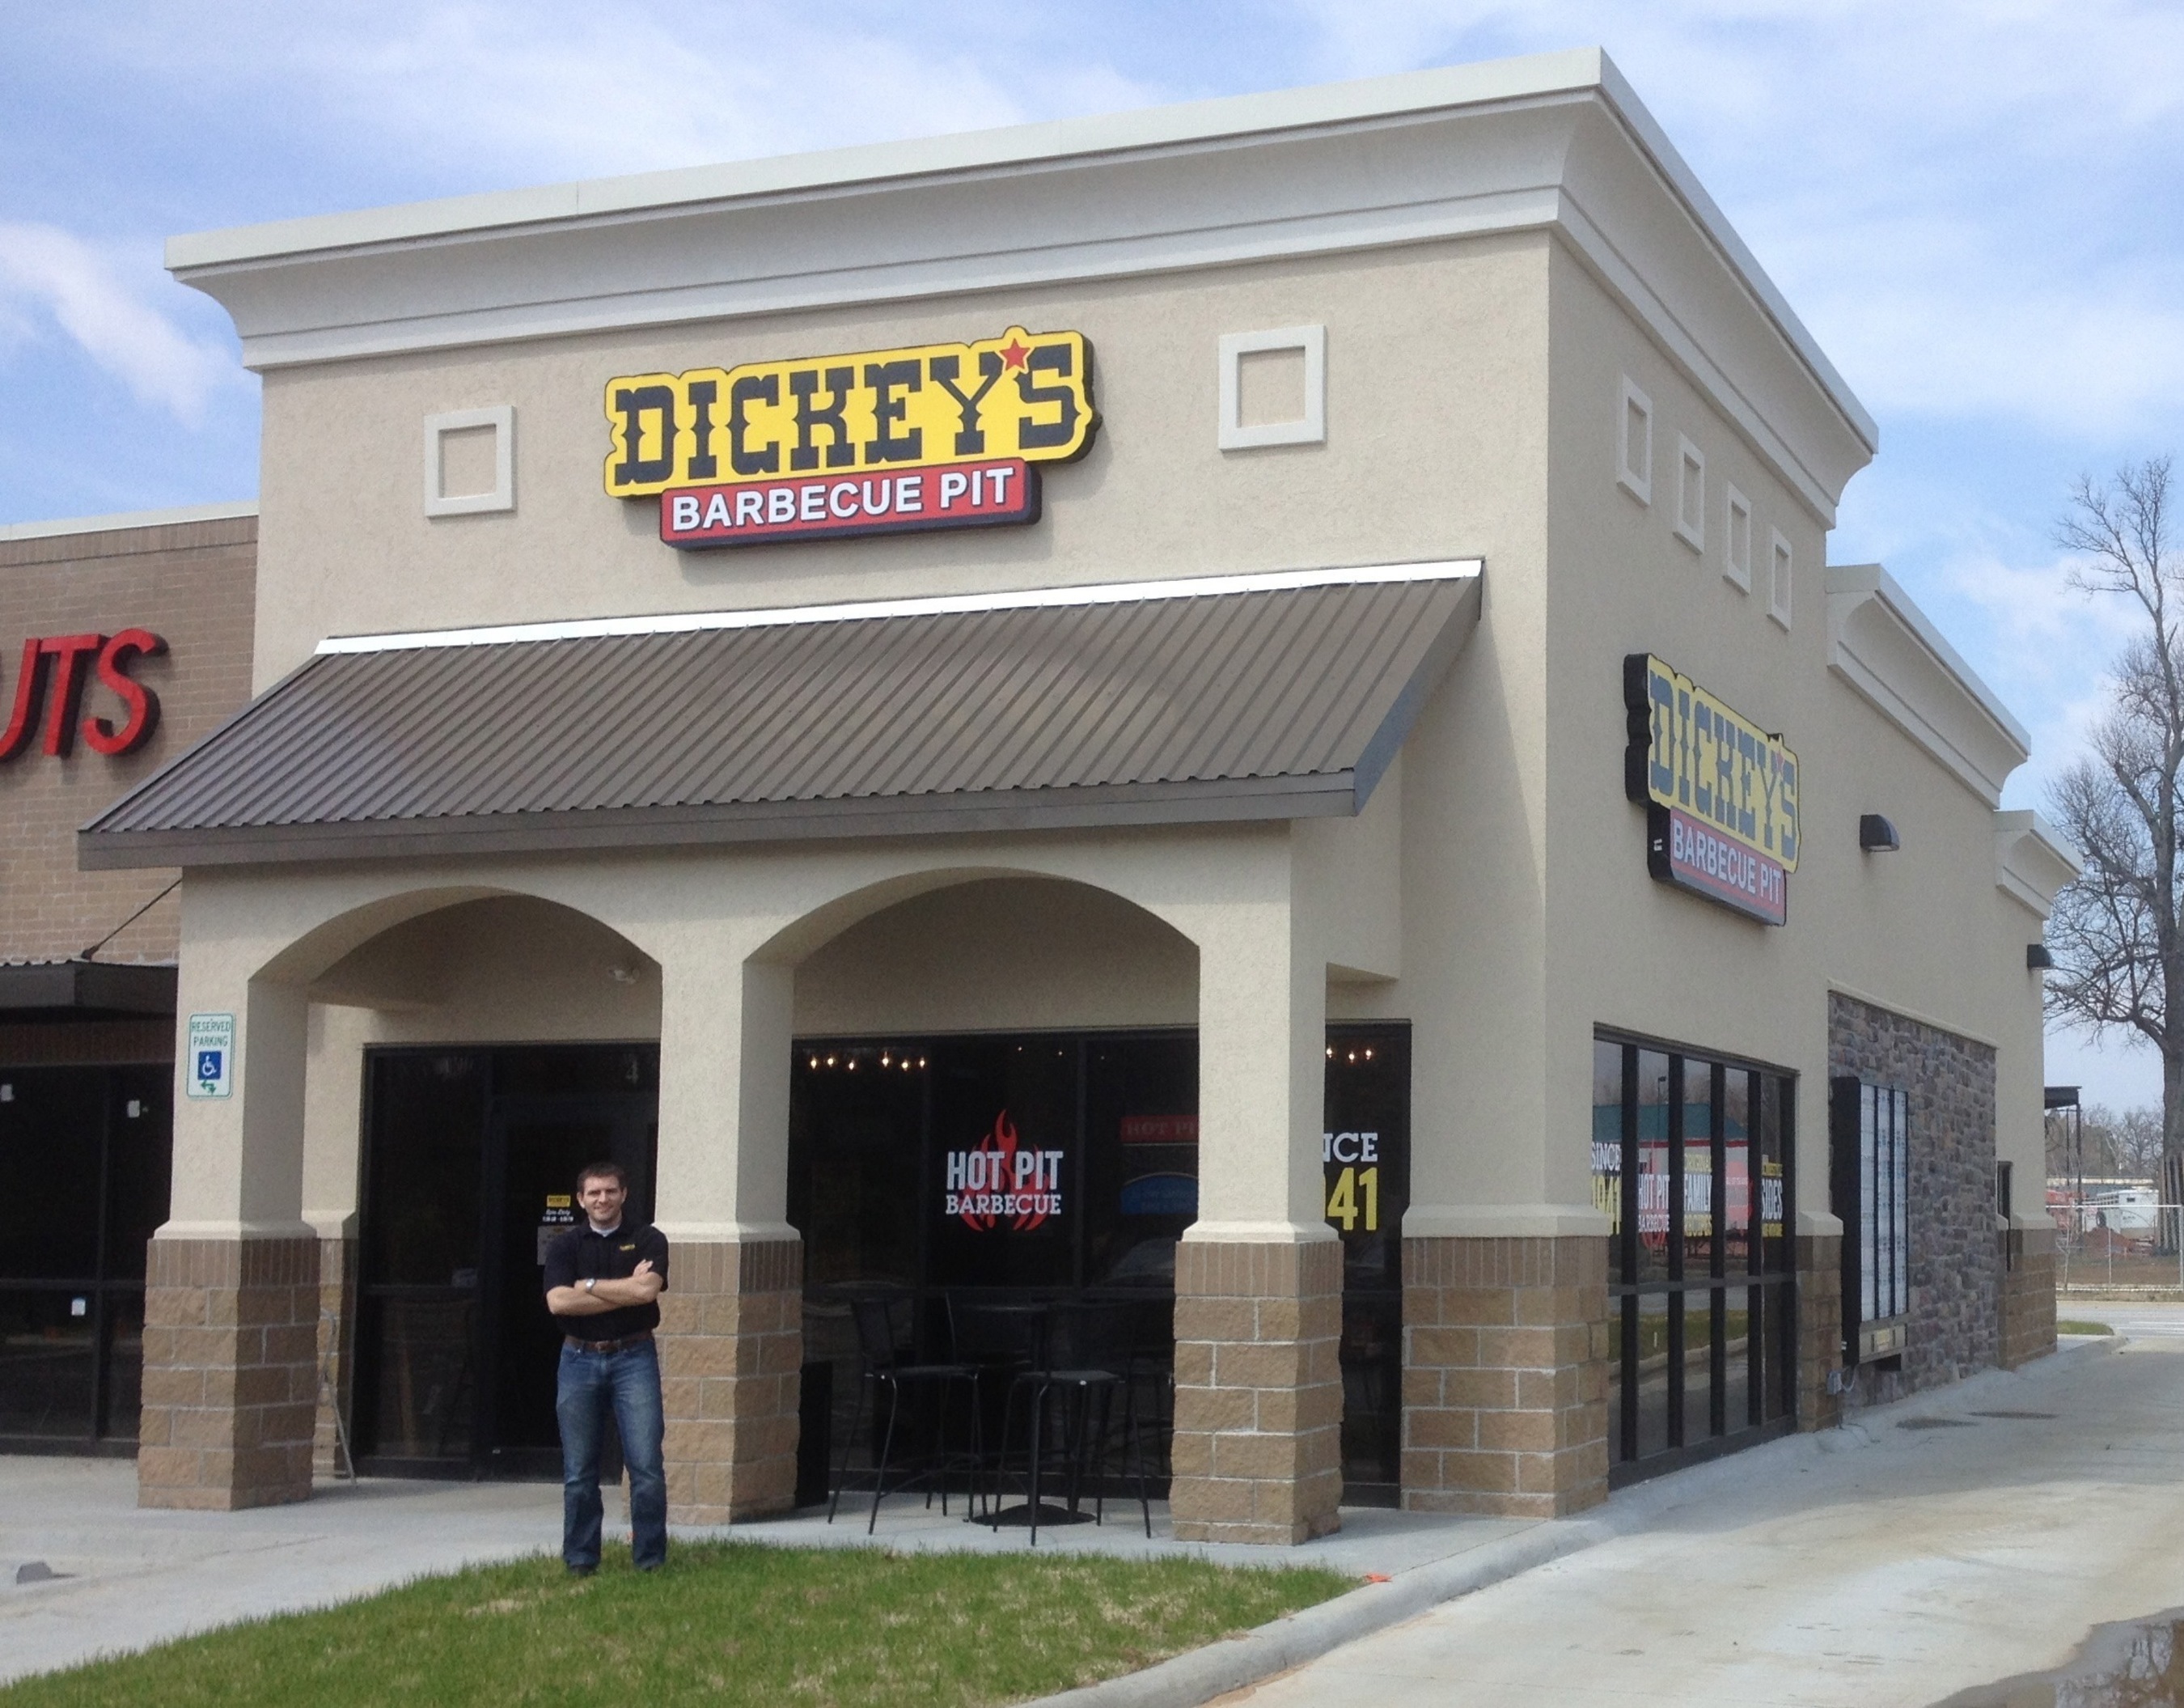 New Dickey's Barbecue Pit Opens in Fayetteville Arkansas (PRNewsFoto/Dickey's Barbecue)